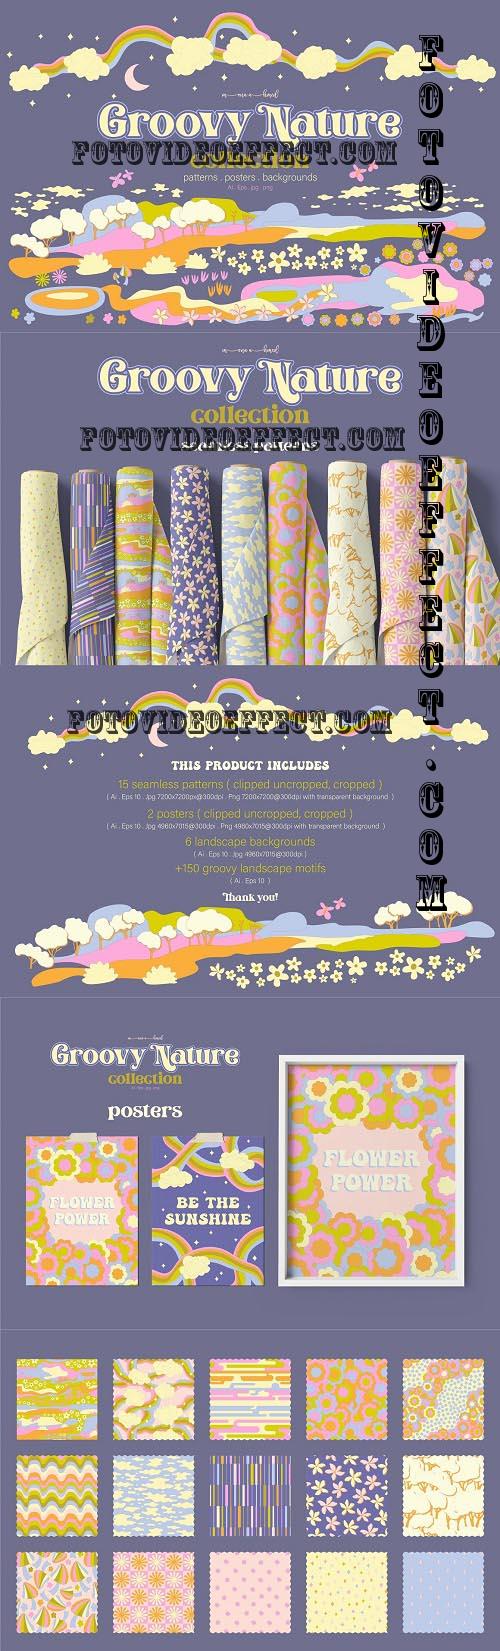 Groovy Nature Collection - 7156824